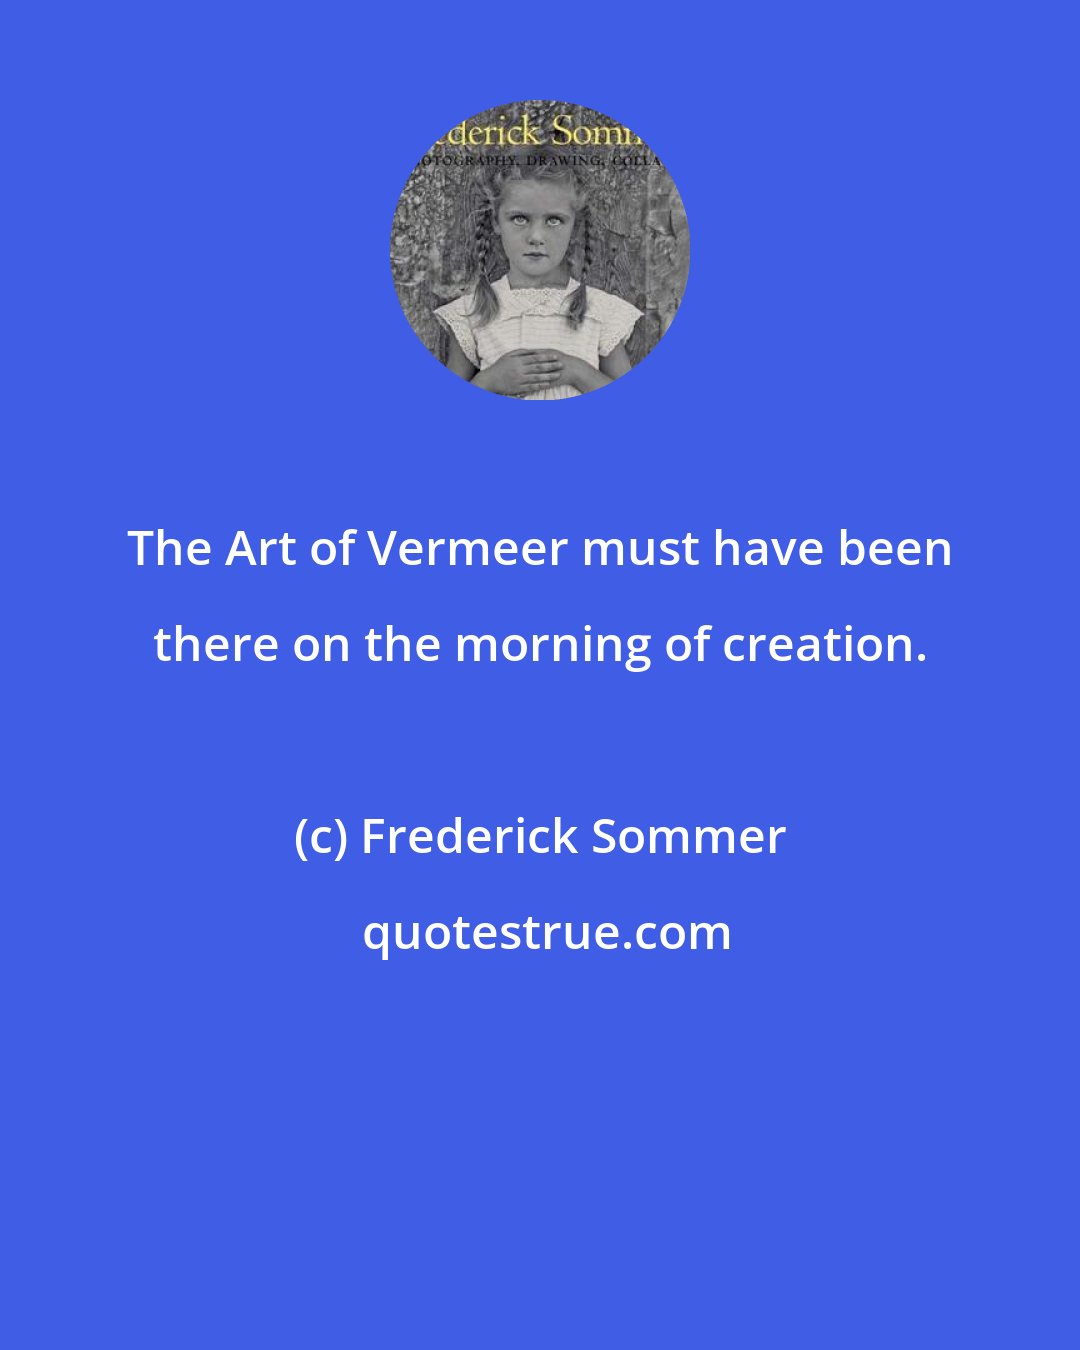 Frederick Sommer: The Art of Vermeer must have been there on the morning of creation.